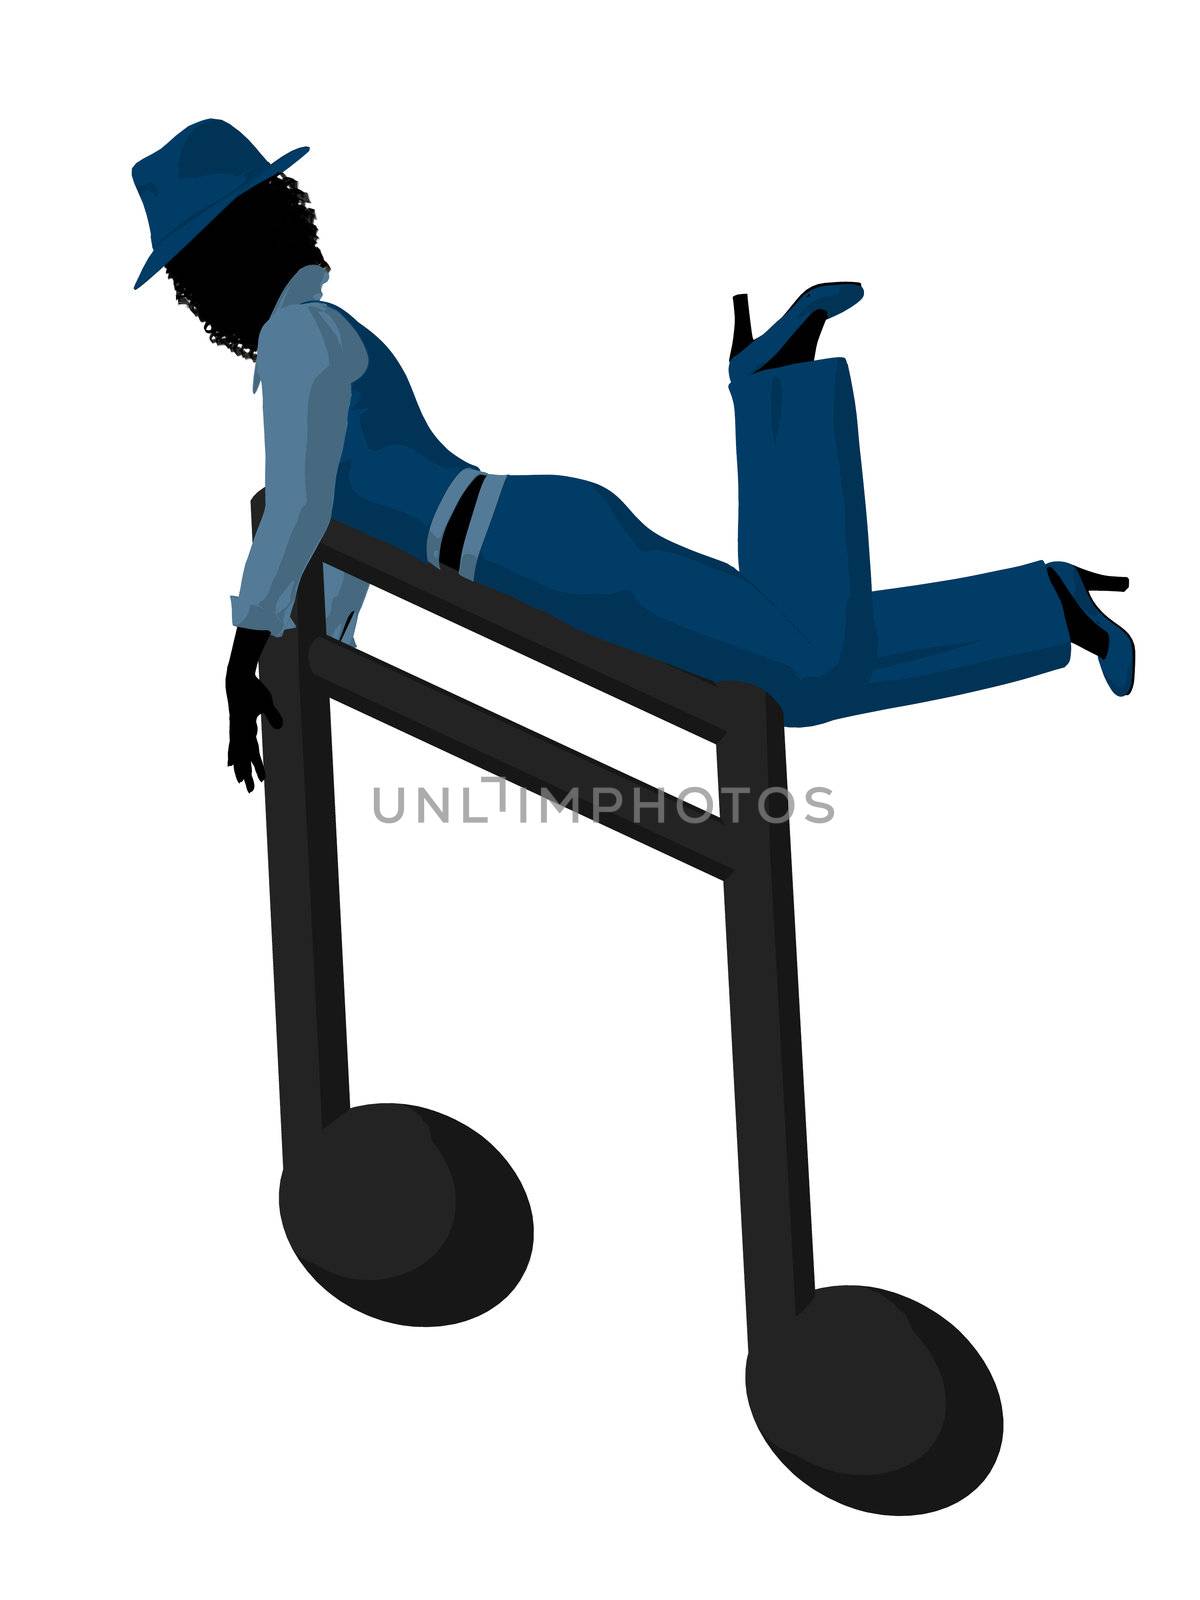 African American Jazz Musician Illustration by kathygold